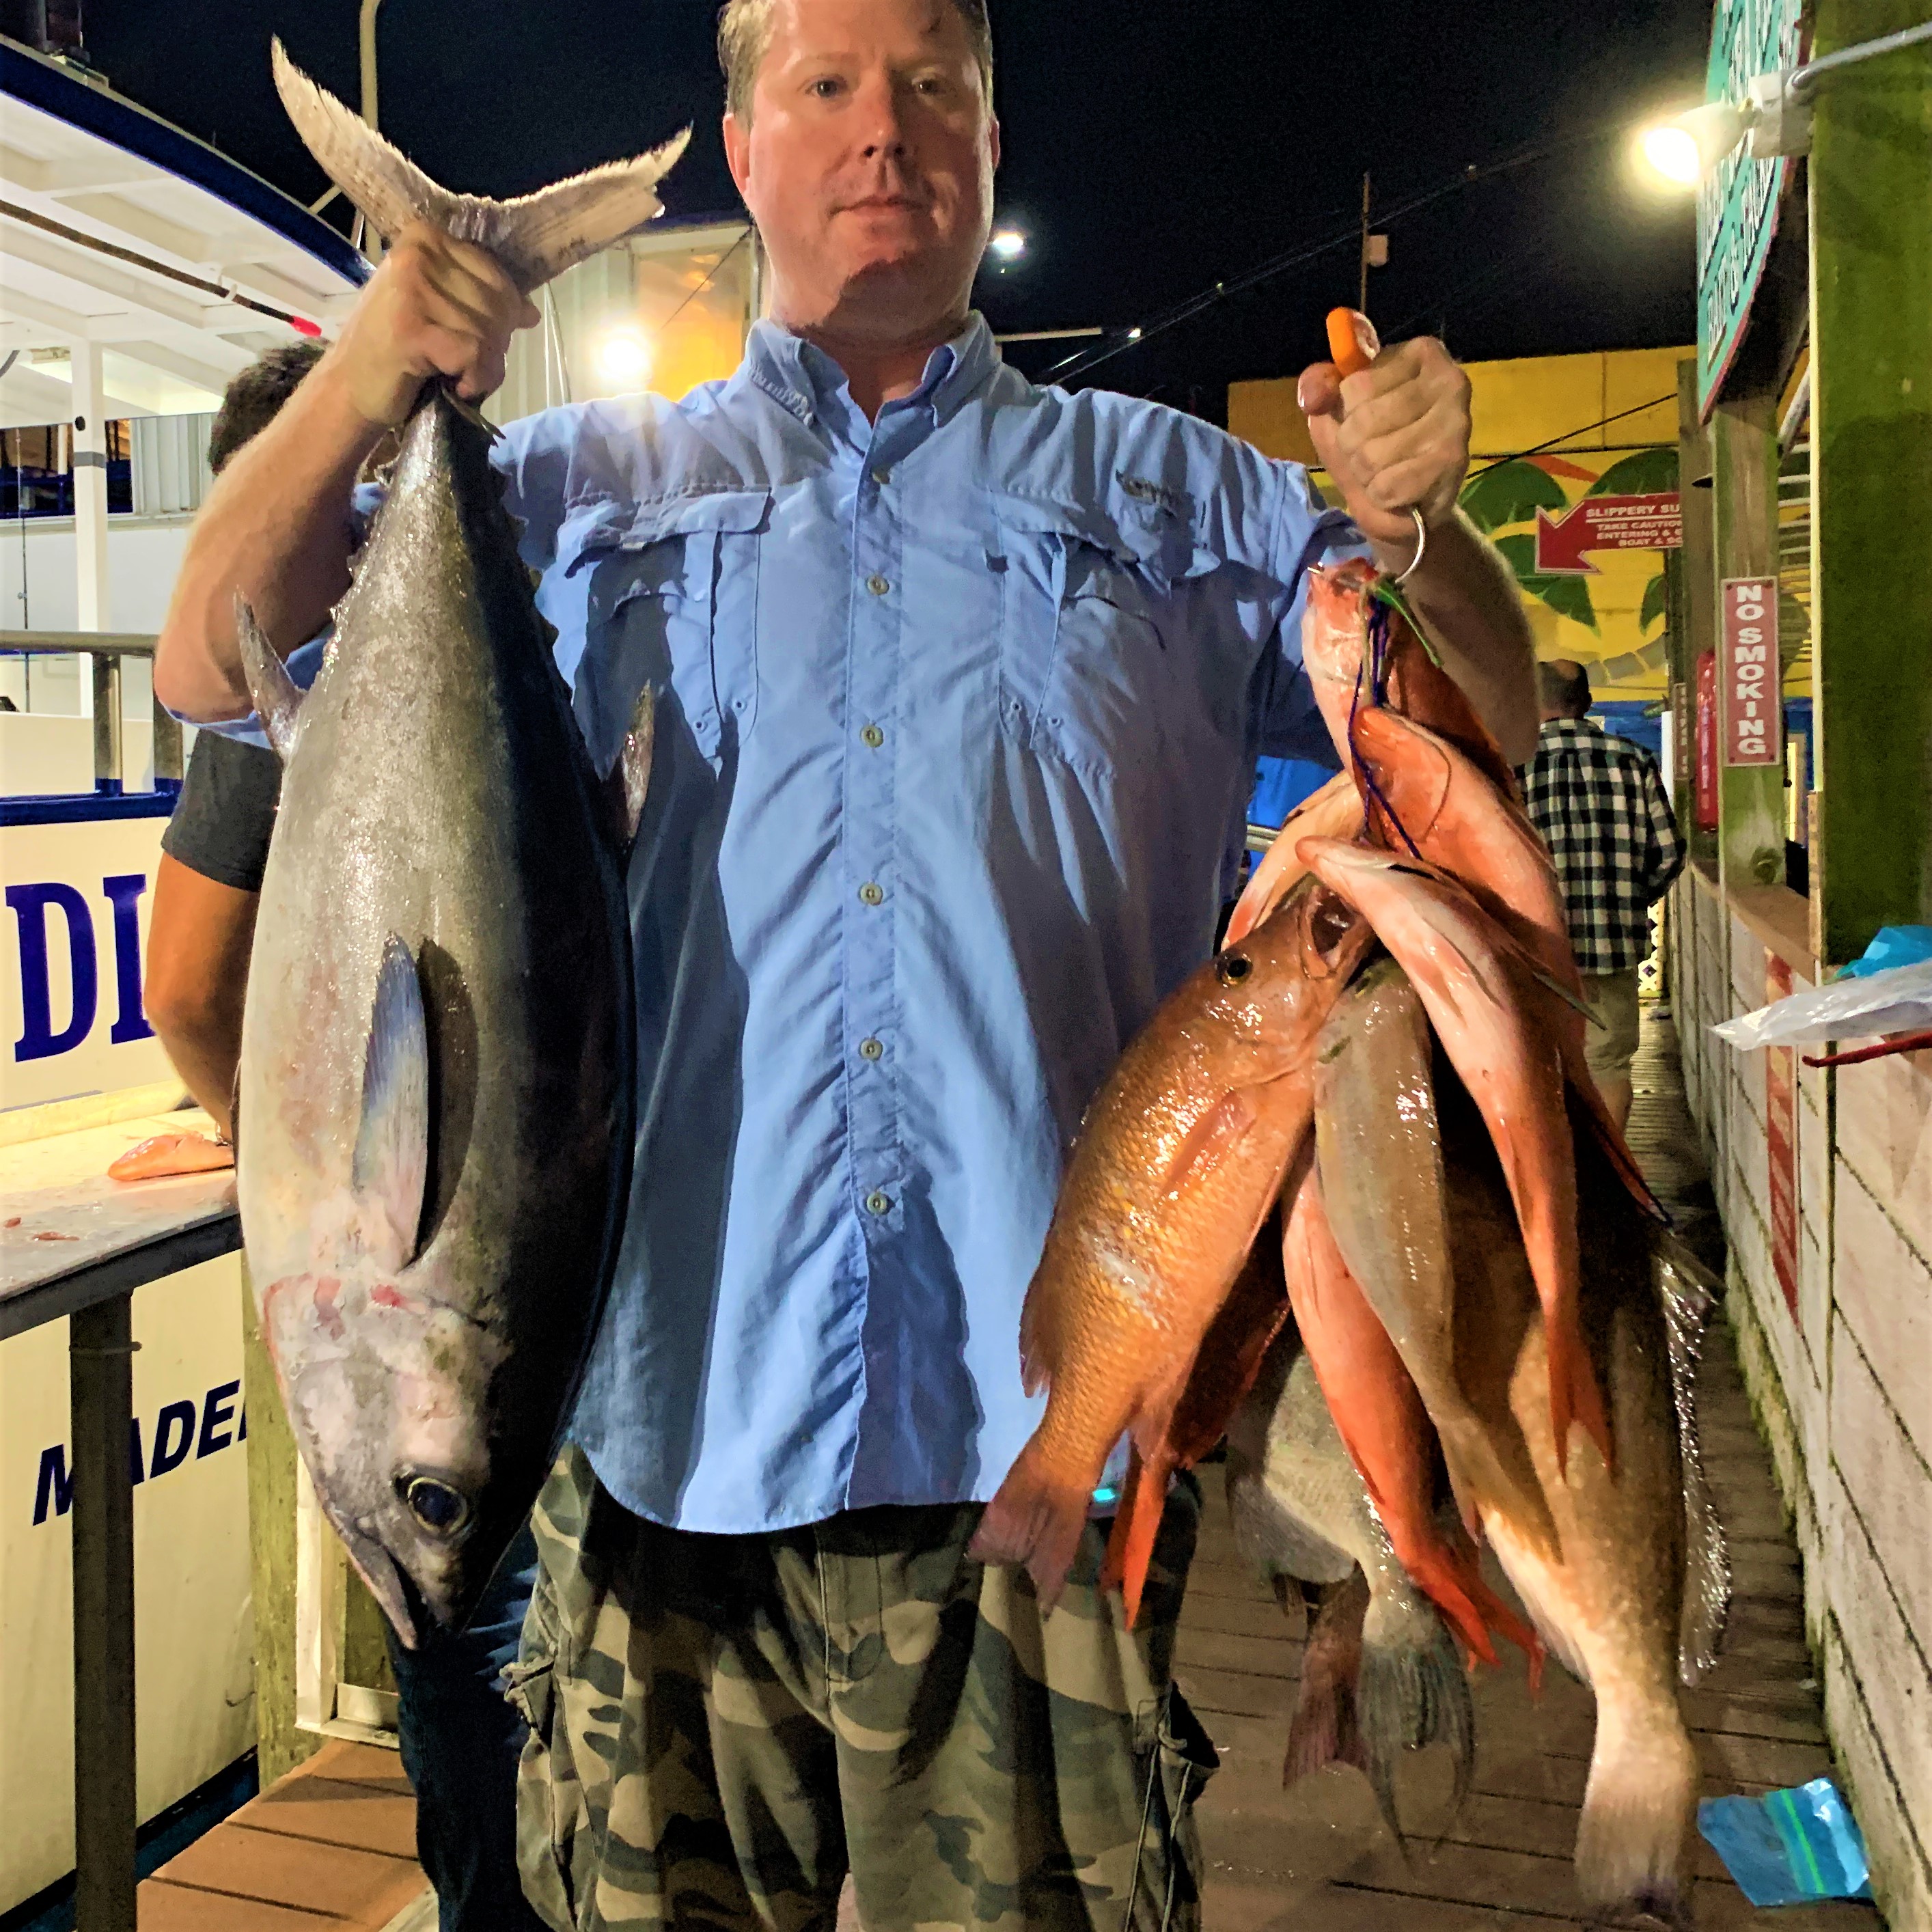 https://www.hubbardsmarina.com/wp-content/uploads/2019/03/Dave-Granger-from-Orlando-showing-off-his-39-hour-bounty-1.jpg